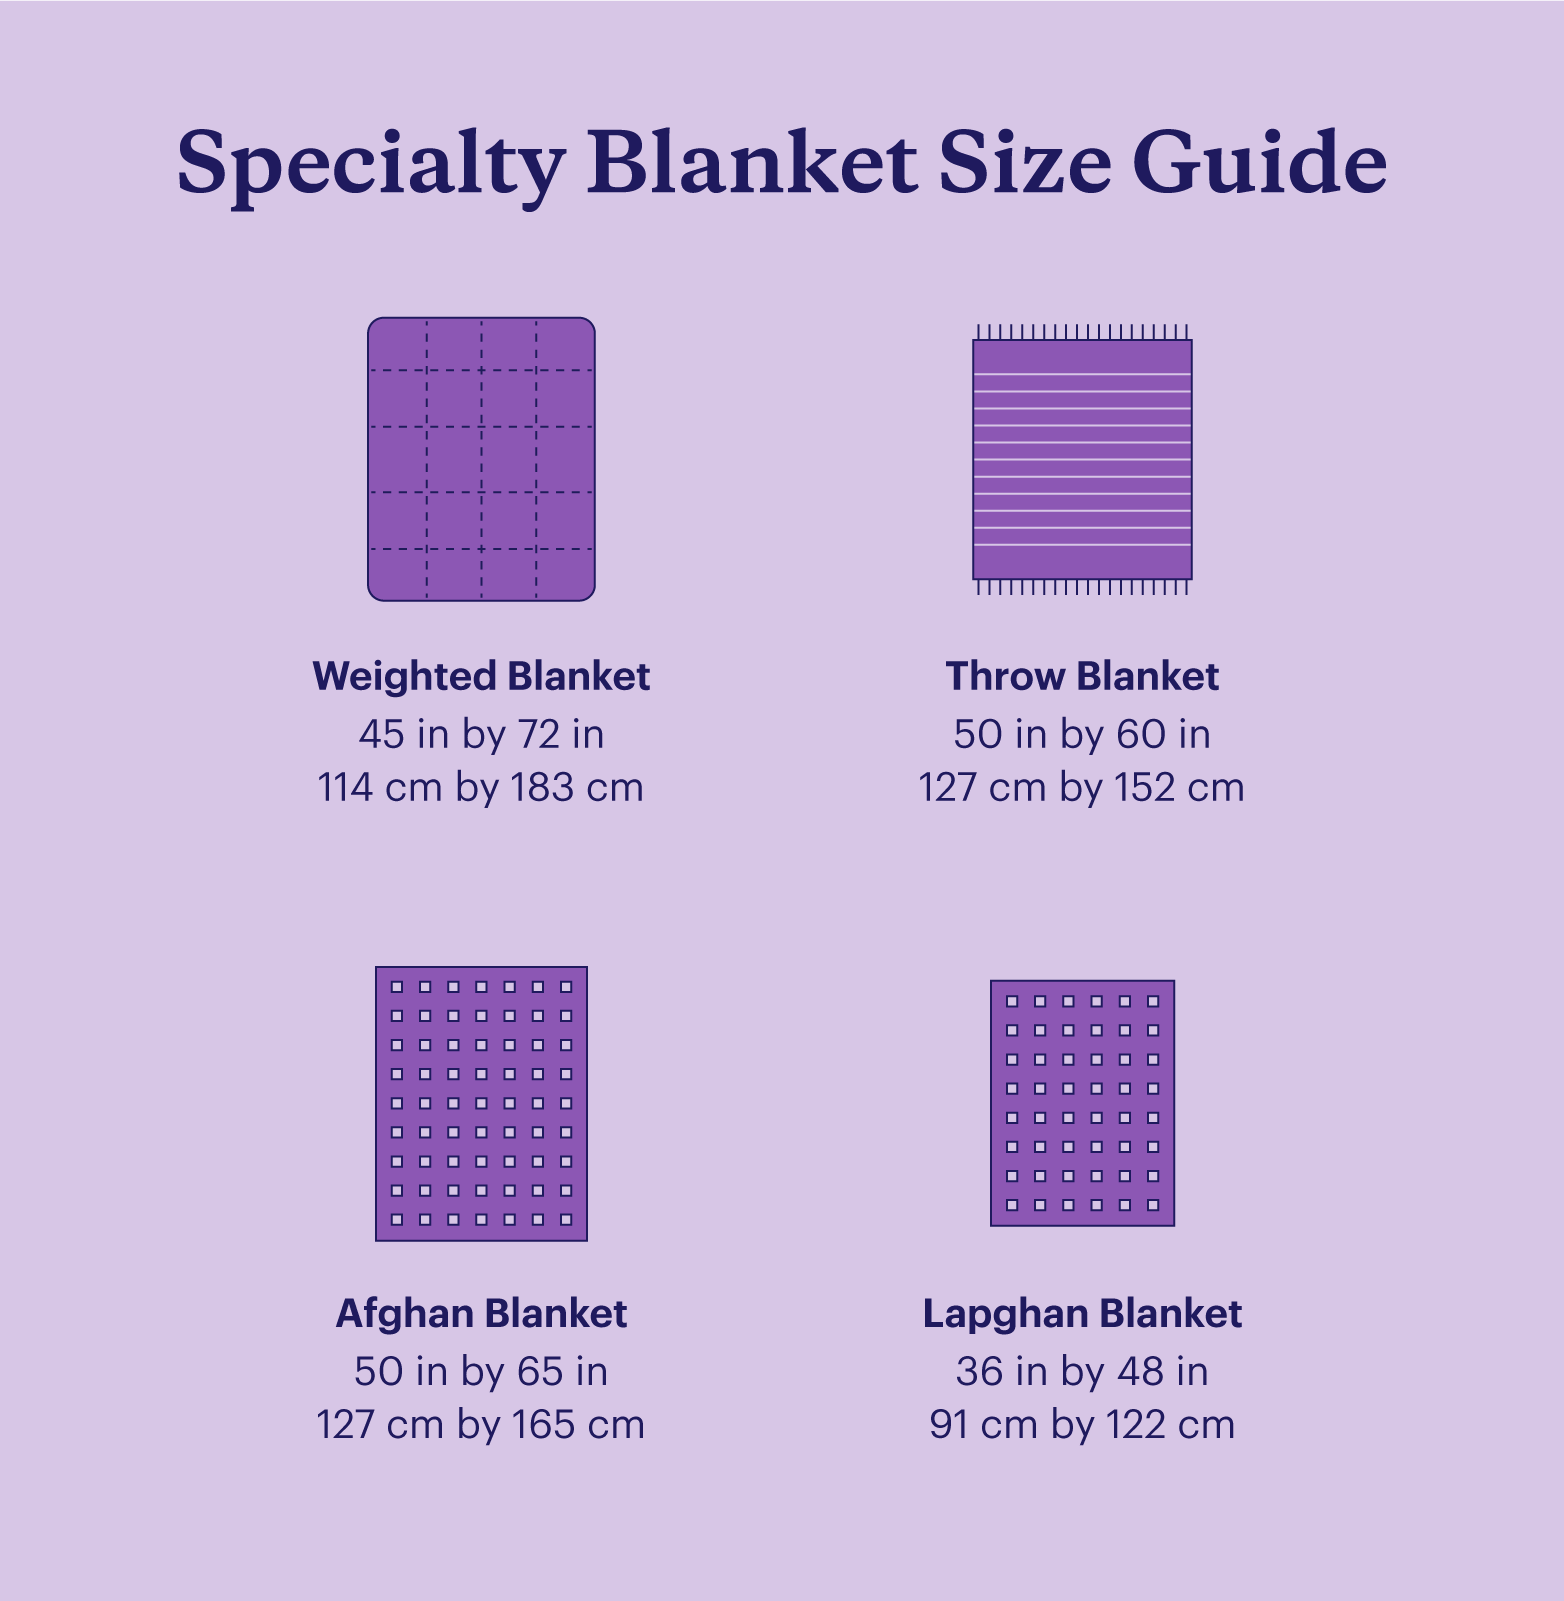 A specialty blanket size guide showcases the dimensions of specialty blanket sizes in inches and centimeters.